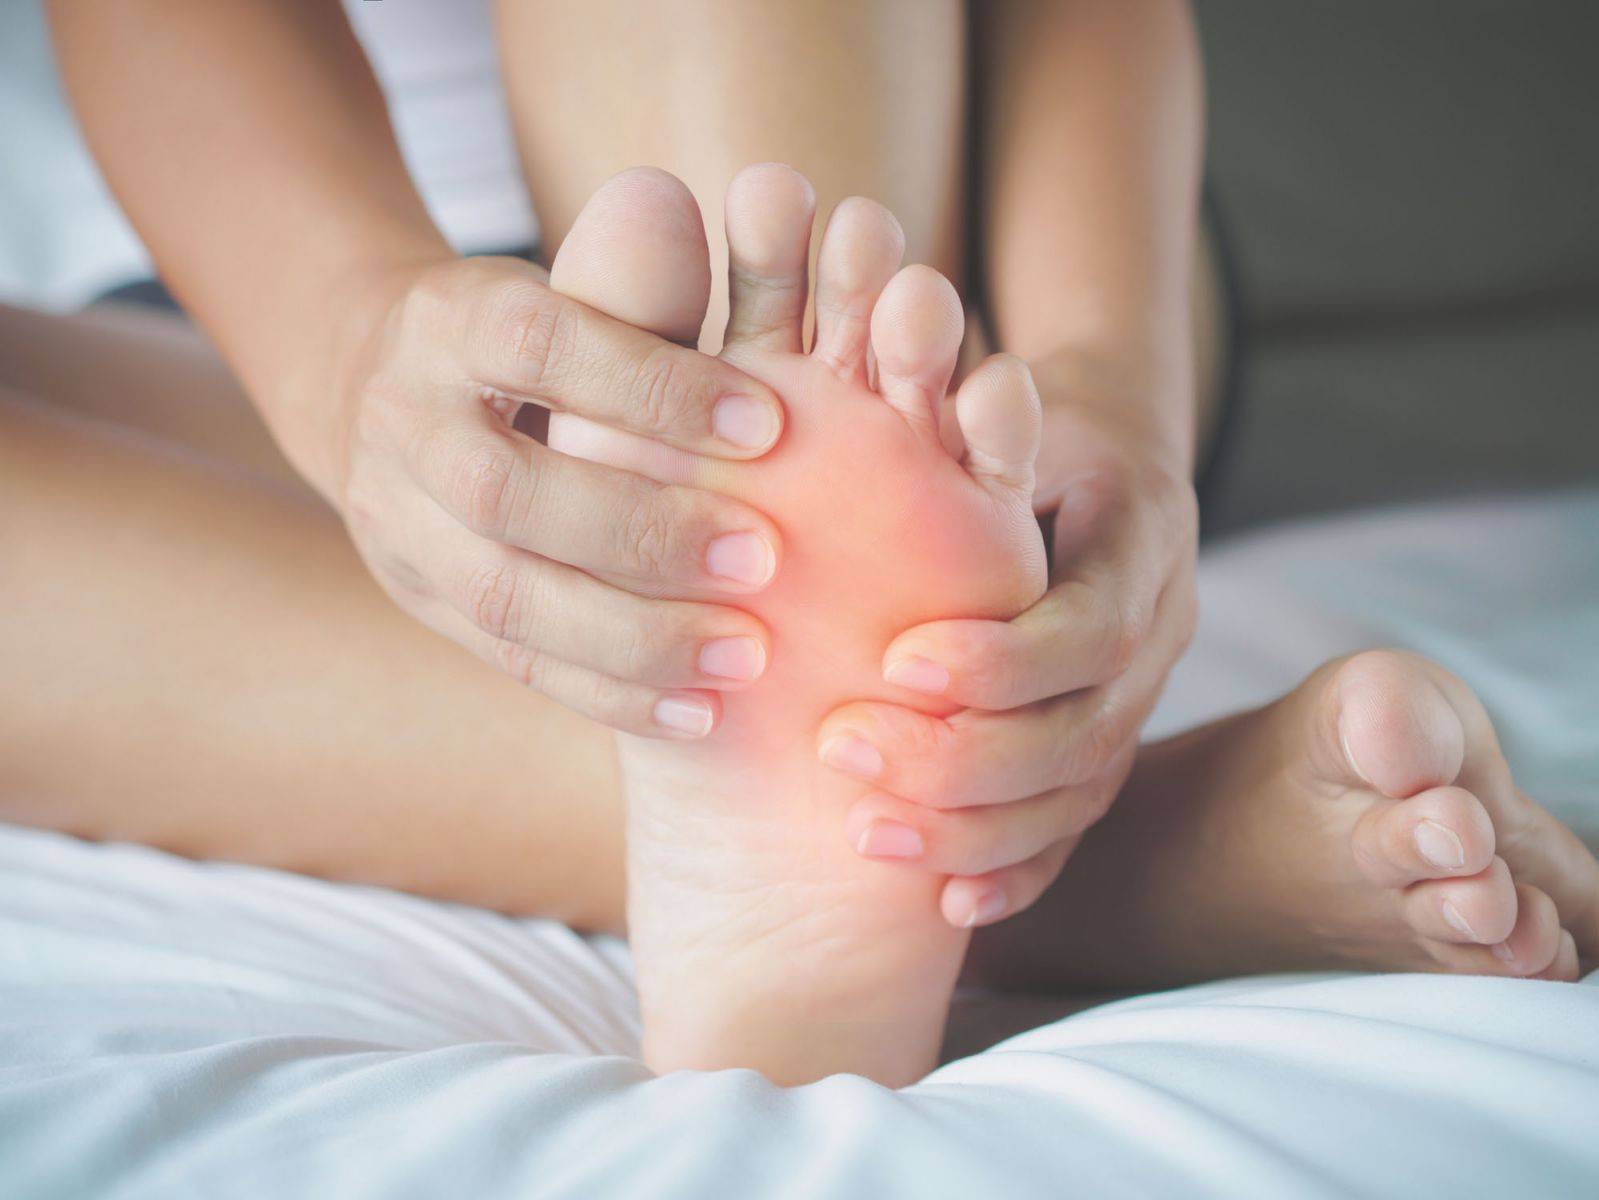 What's causing those swollen feet 